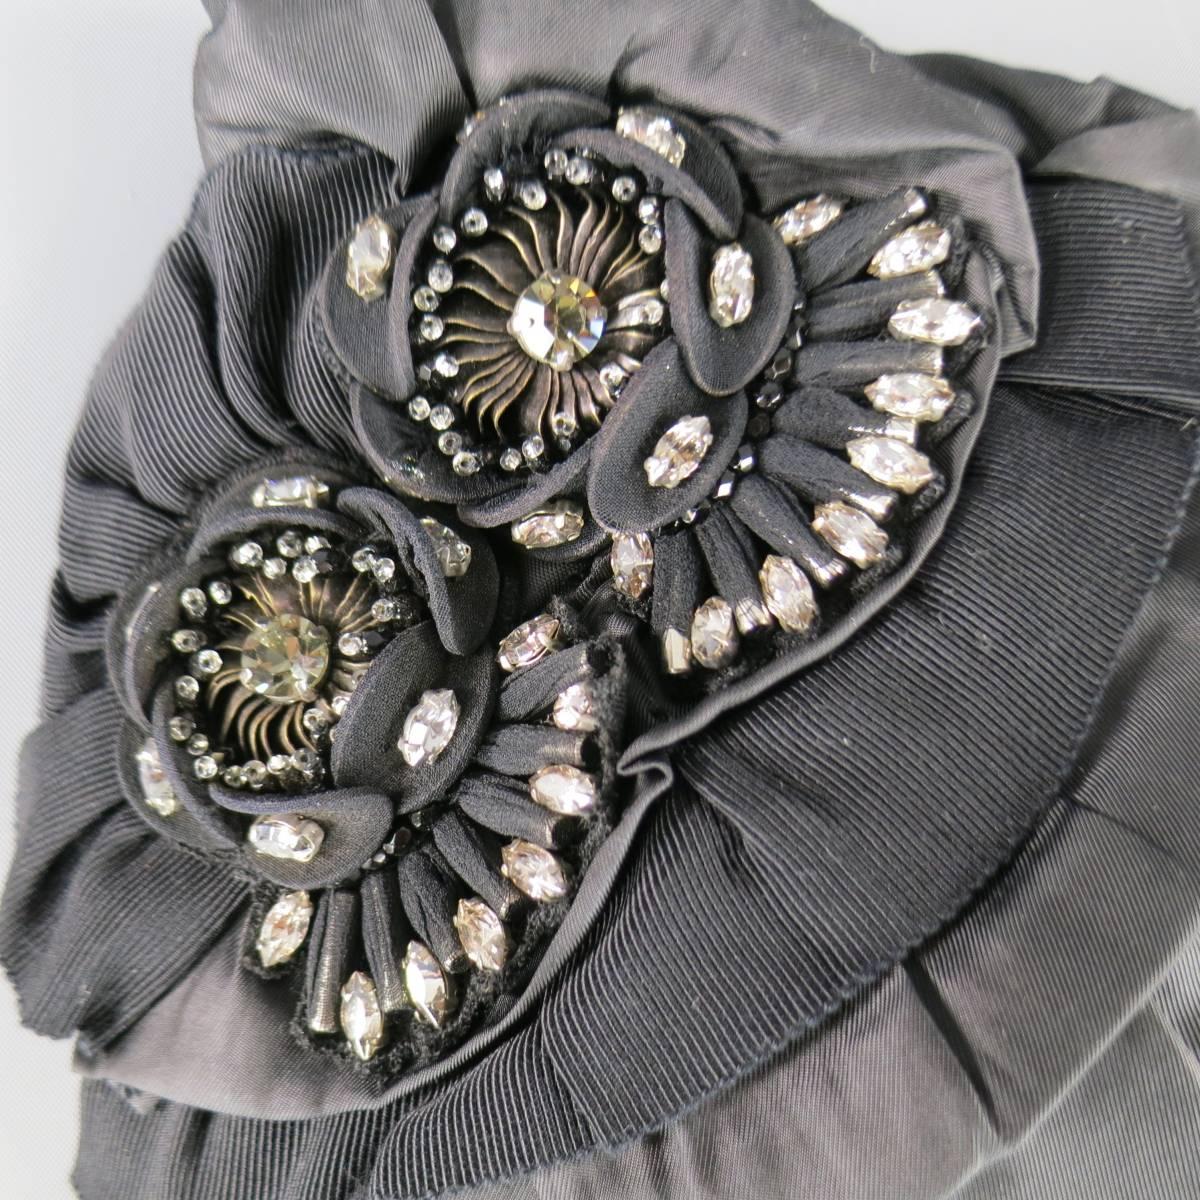 This lovely ELIE TAHARI clutch bag comes in black matte naylon with a gathered top zip closure, and ruffled ribbon and satin details with gorgeous rhinestone crystal flower embellishments.
 
Brand New Condition.
 
Measurements:
 
Length: 14